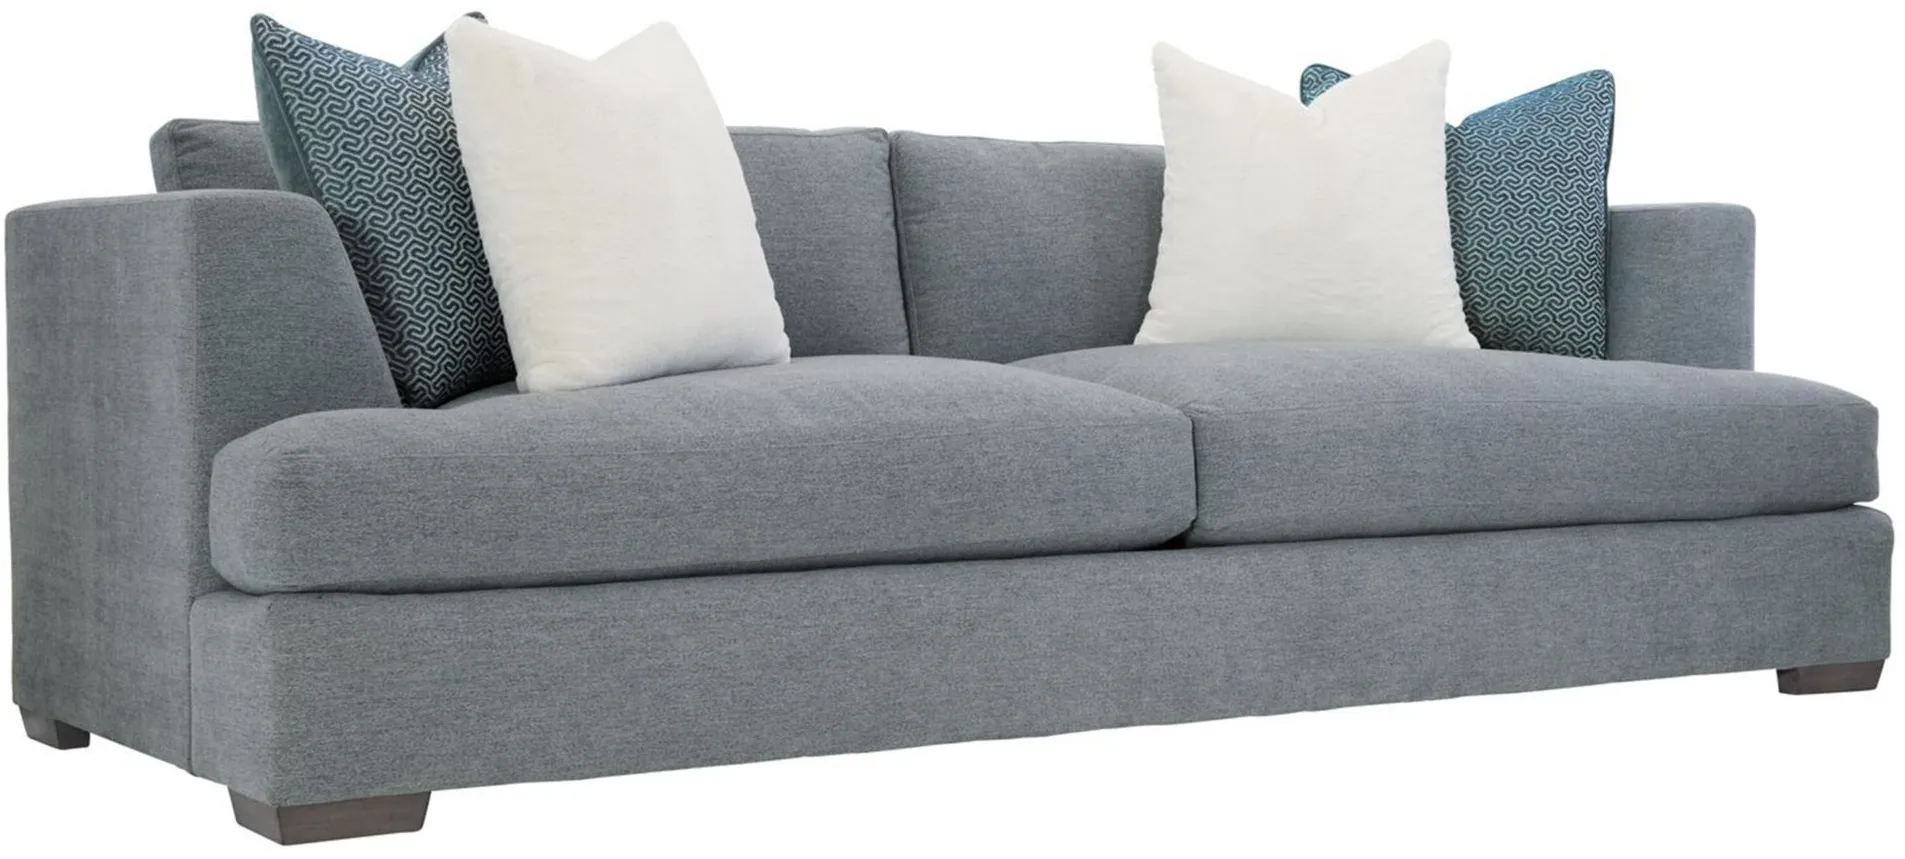 Giselle Sofa in Blue by Bernhardt